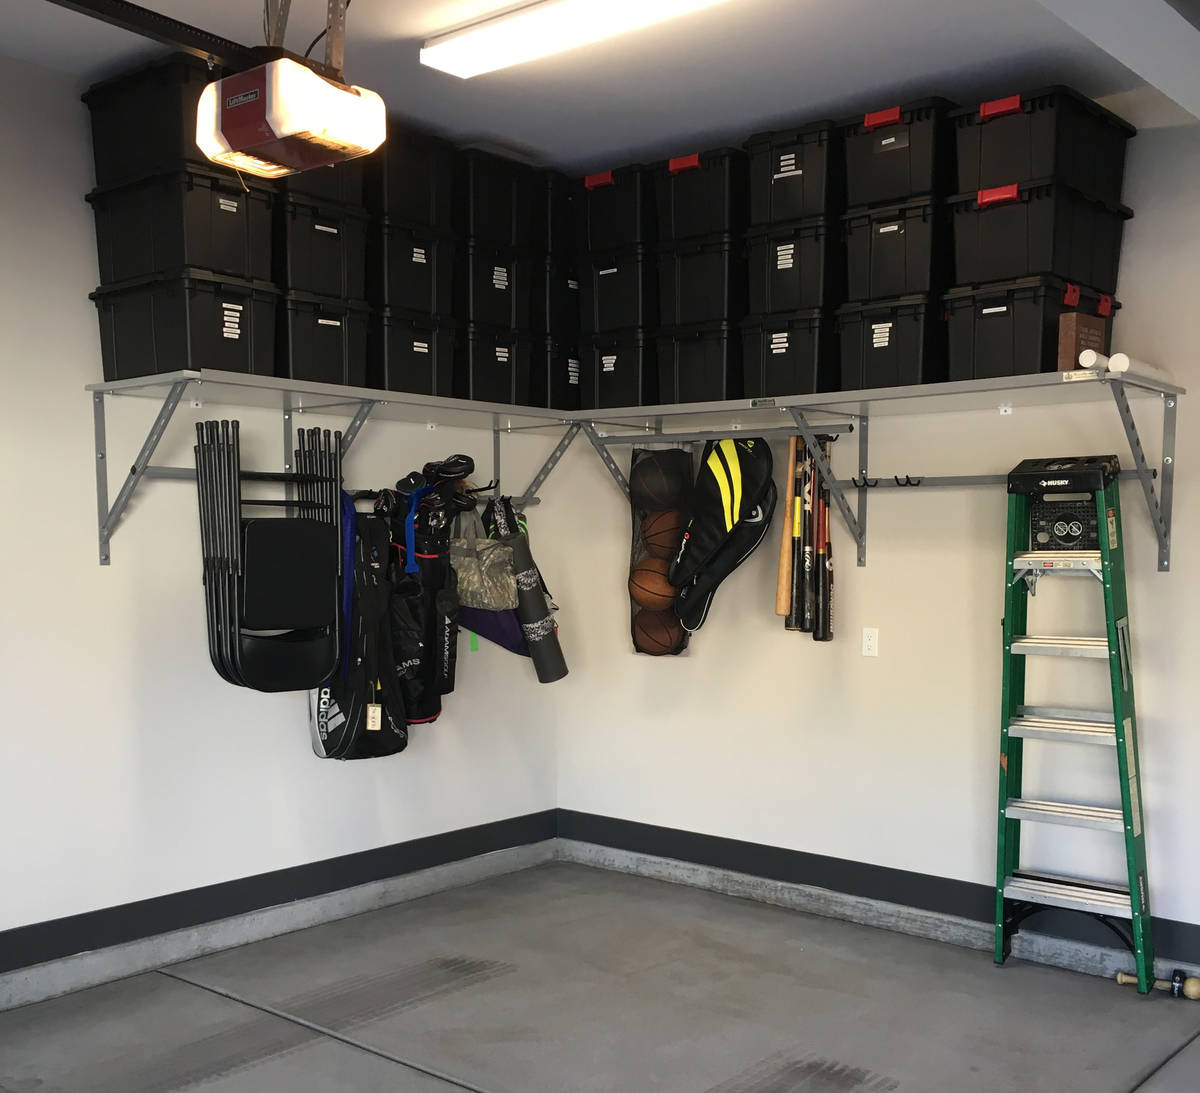 Garage storage space can be expanded Las Vegas ReviewJournal